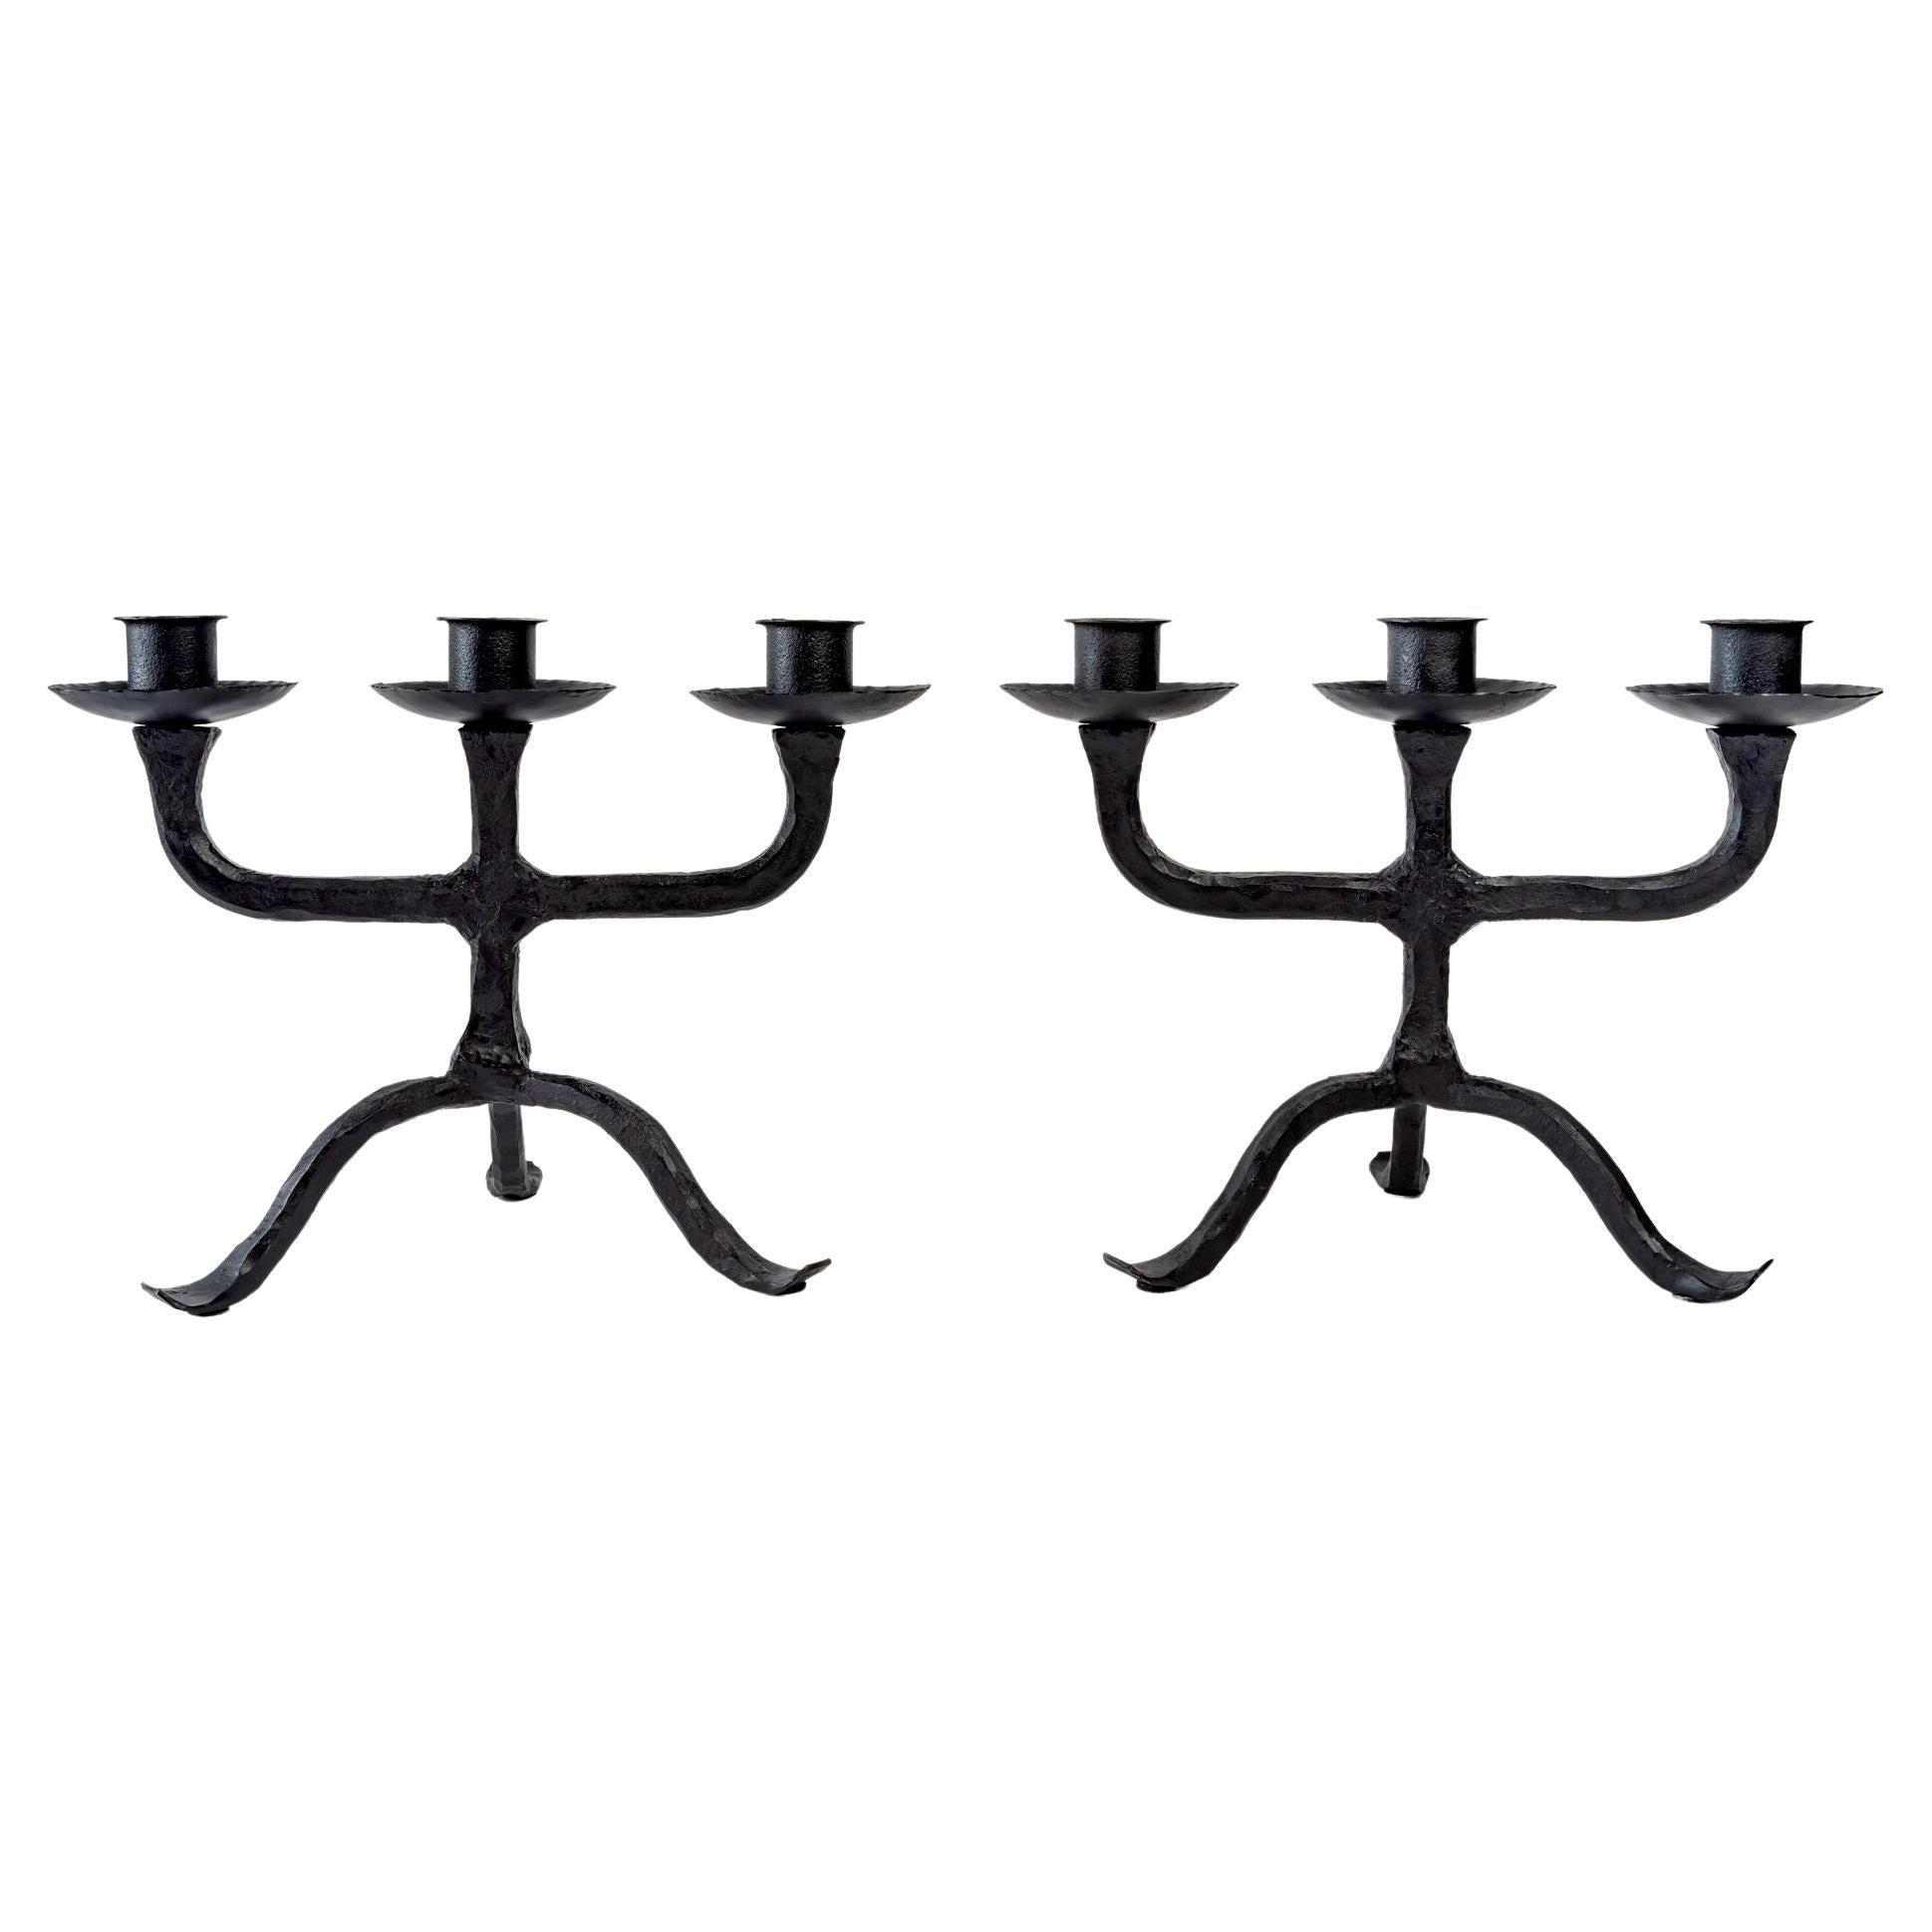 This pair of candlesticks is in wrought iron handmade in the workshops of Marolles in the 1950s.
They are composed of a central stem resting on 3 pretty scrolled feet ending in dishes.
On the upper part, the central stem is embellished with four